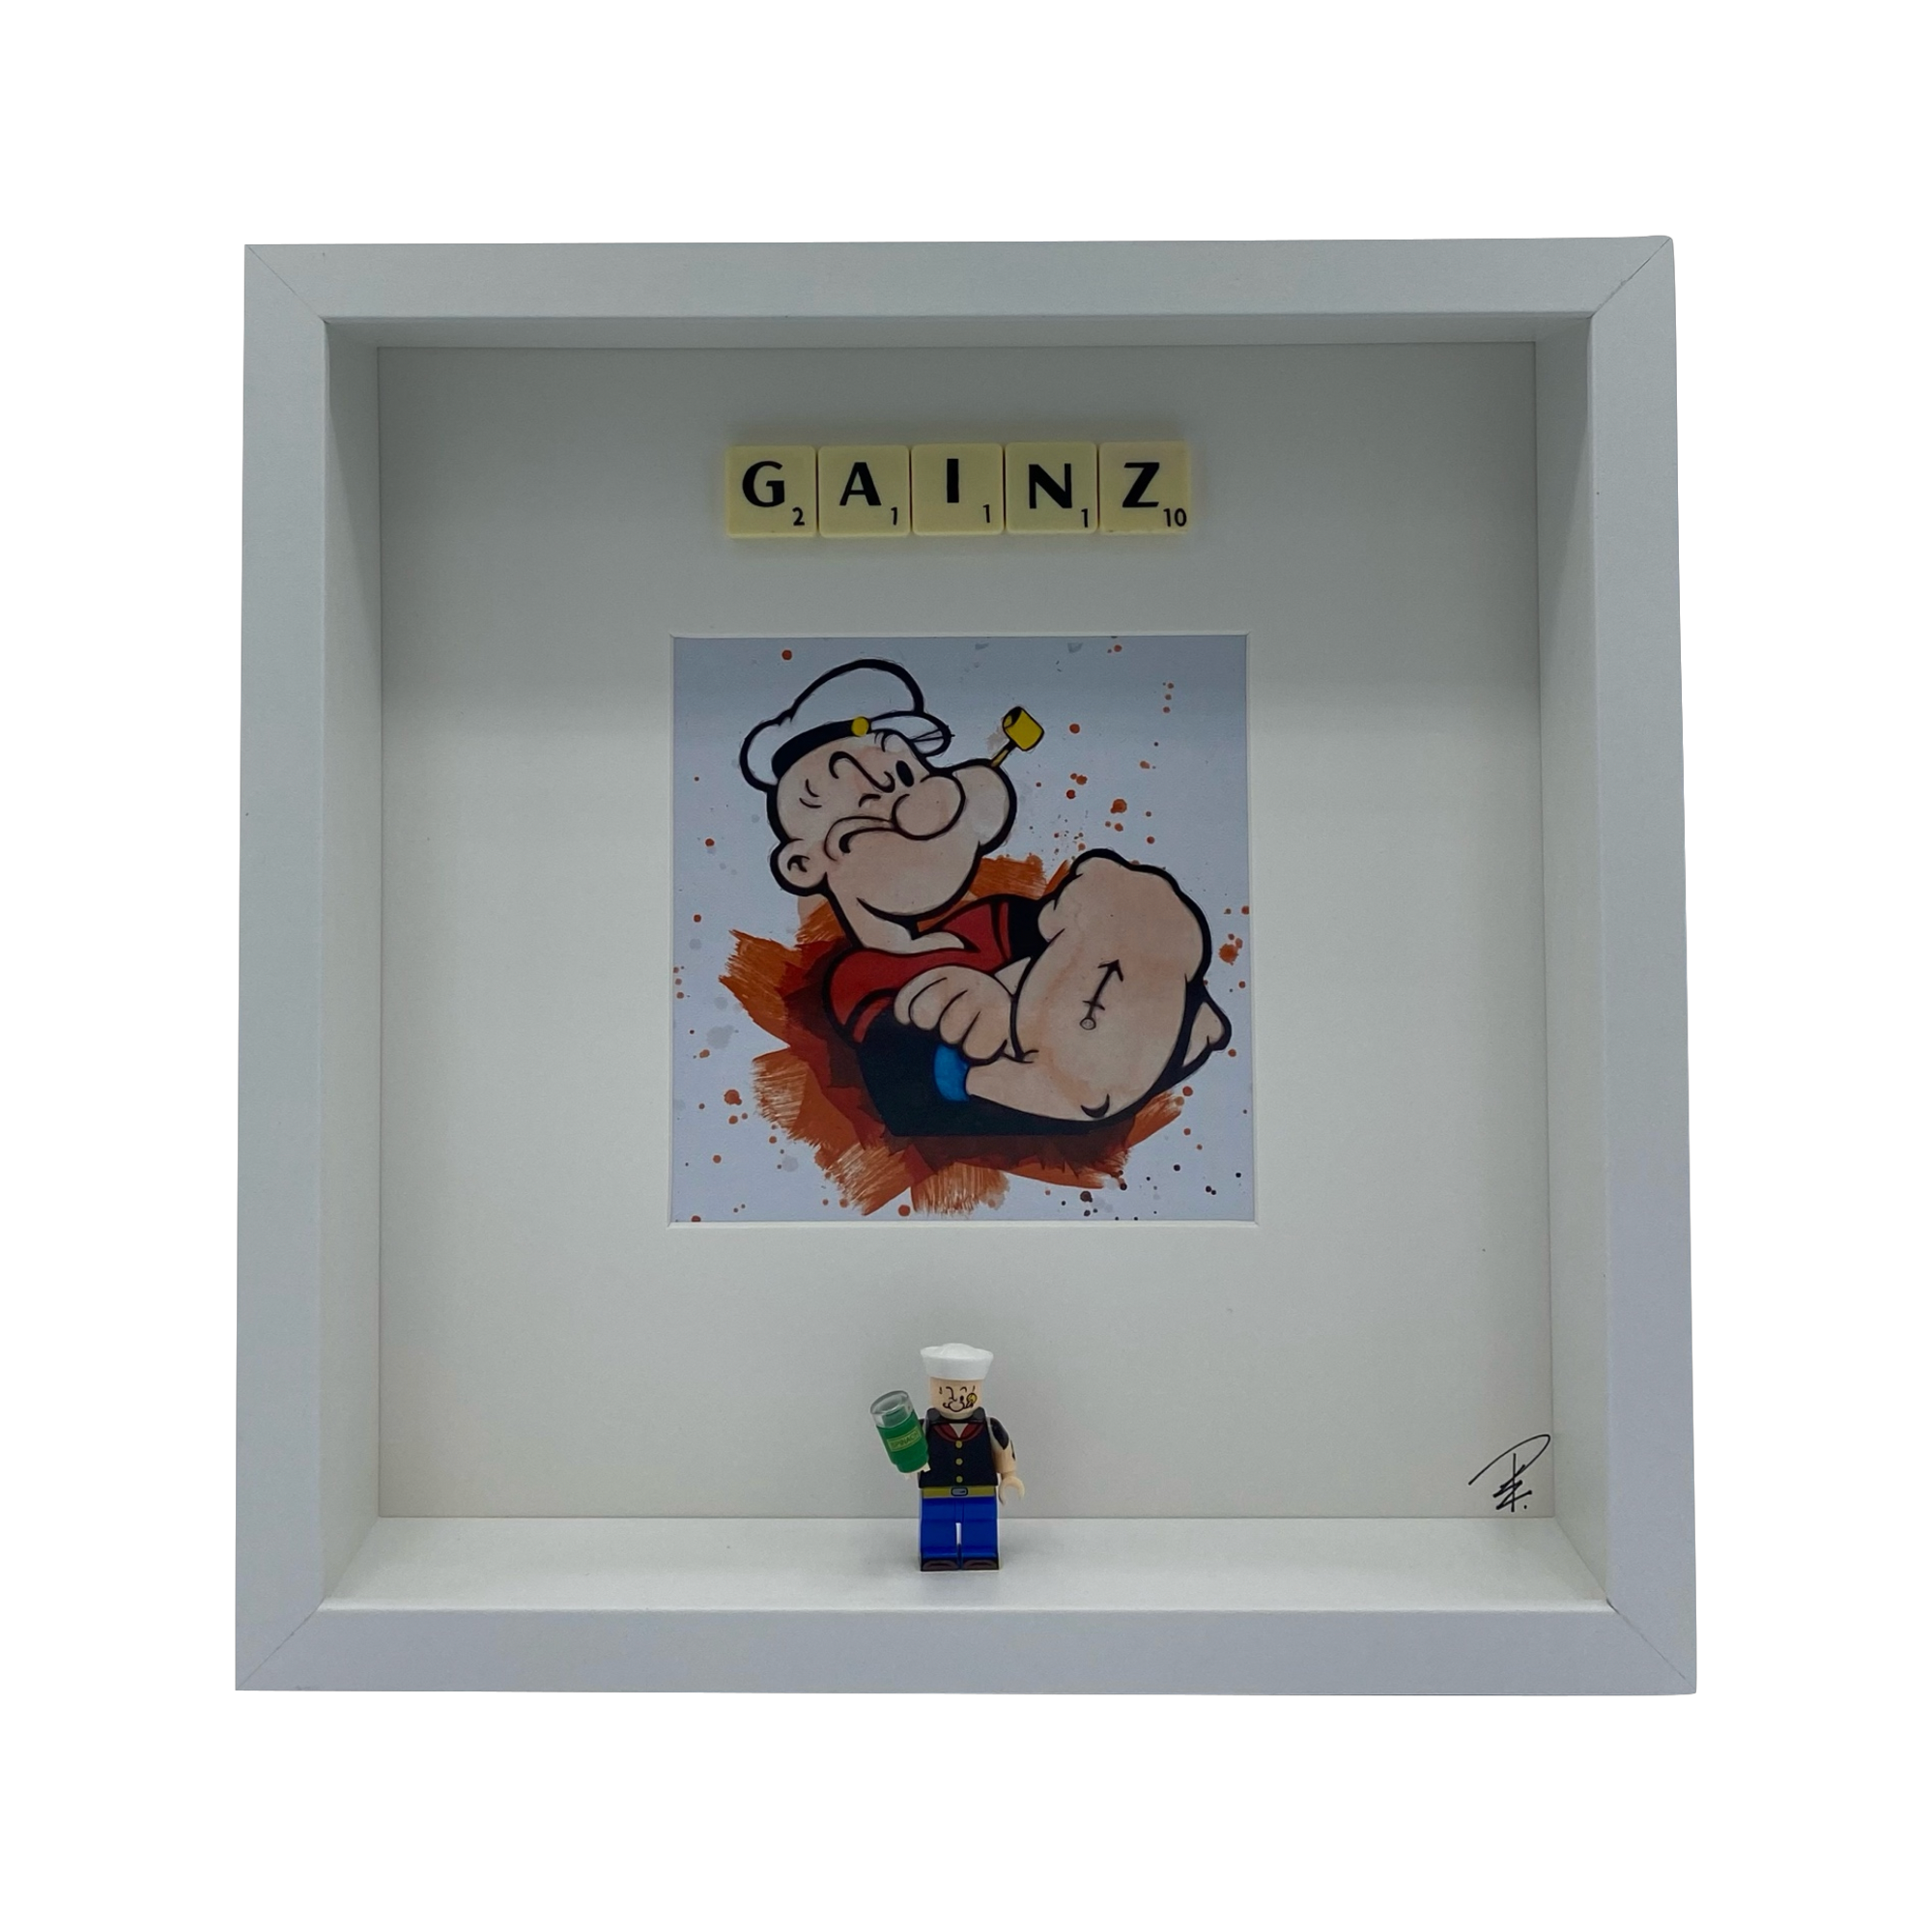 "Gainz" picture frame